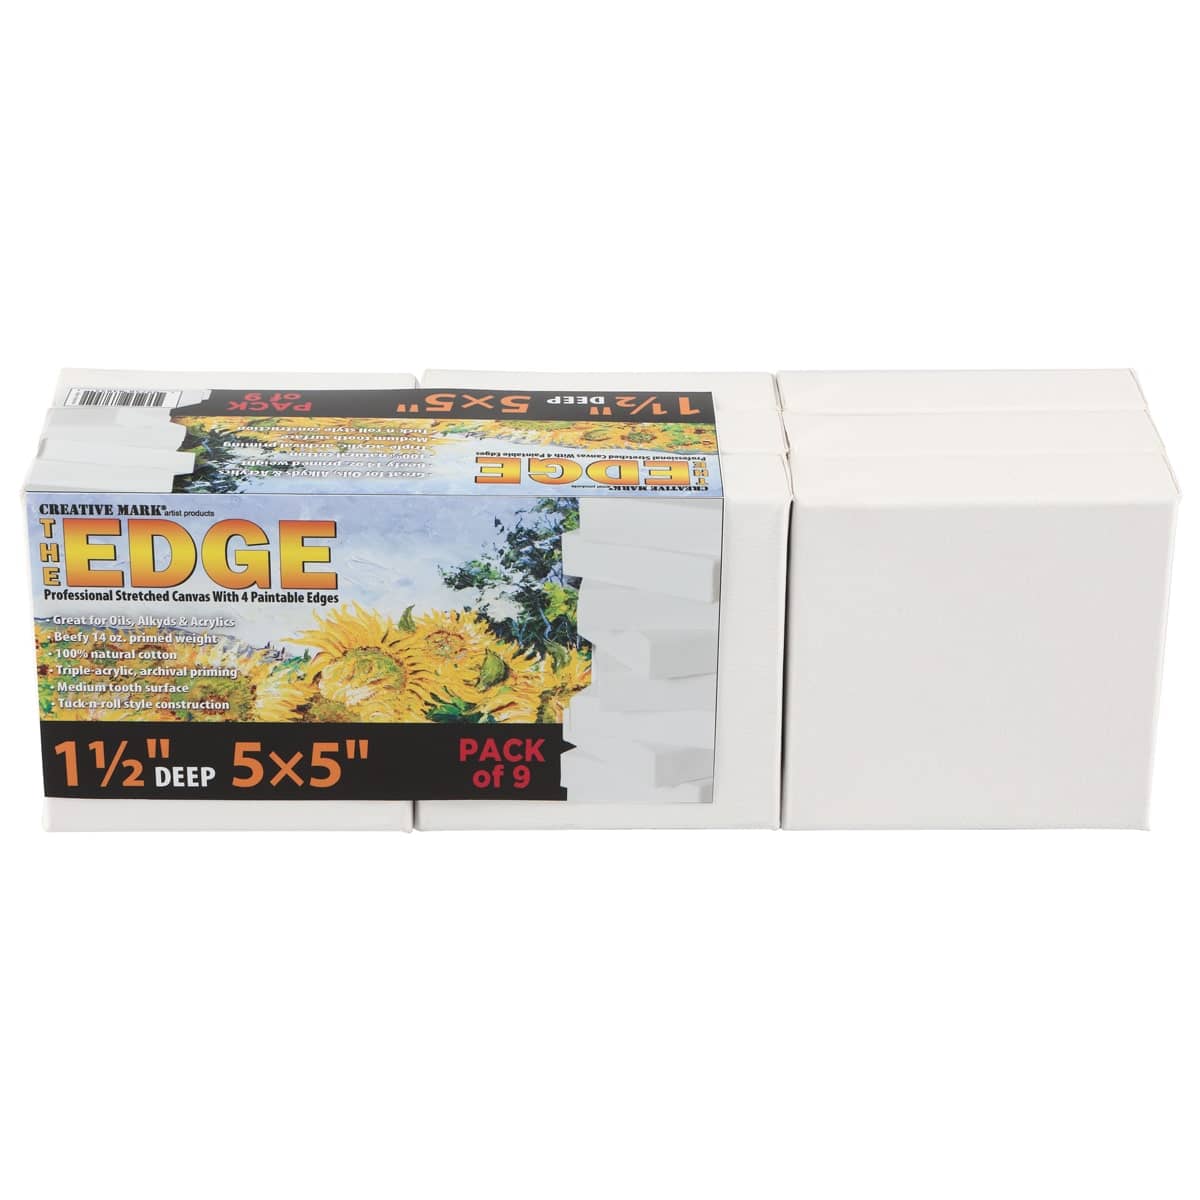 The Edge All Media Small Square Cotton Deluxe Stretched Canvas 1-1/2" Deep packs of 9